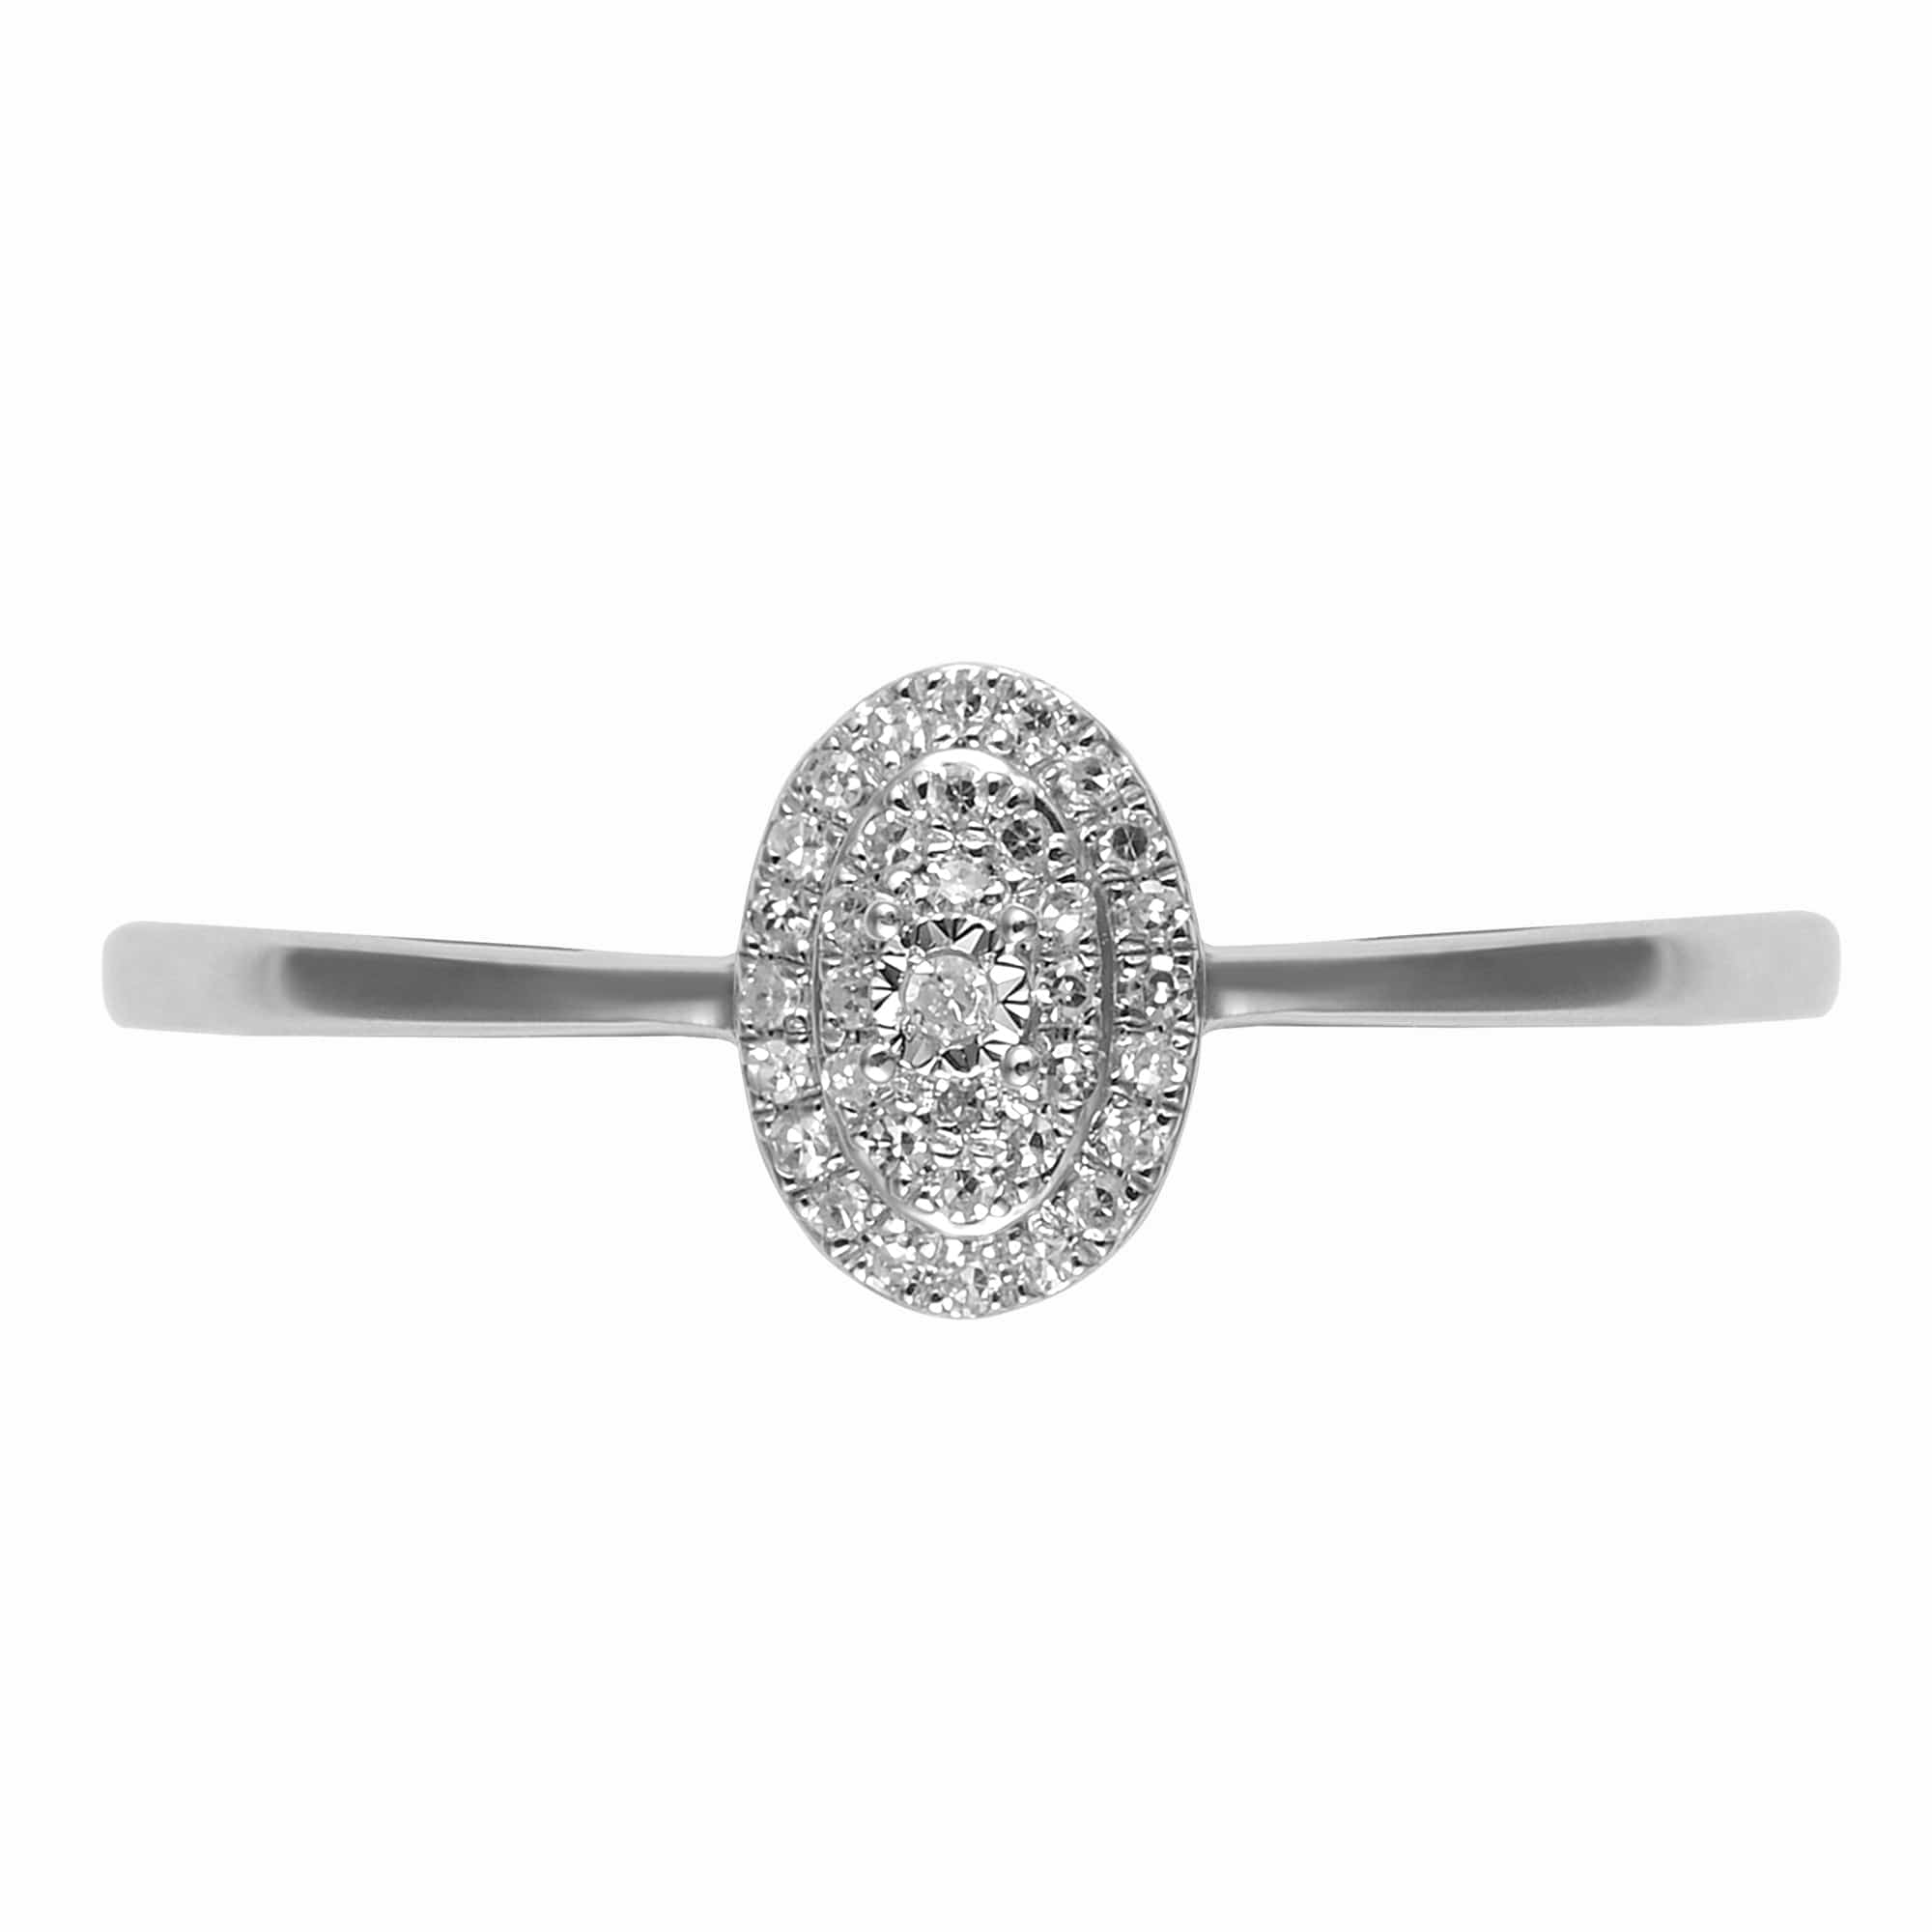 47676R011 Classic Oval Diamond Cluster Ring in 9ct White Gold 2